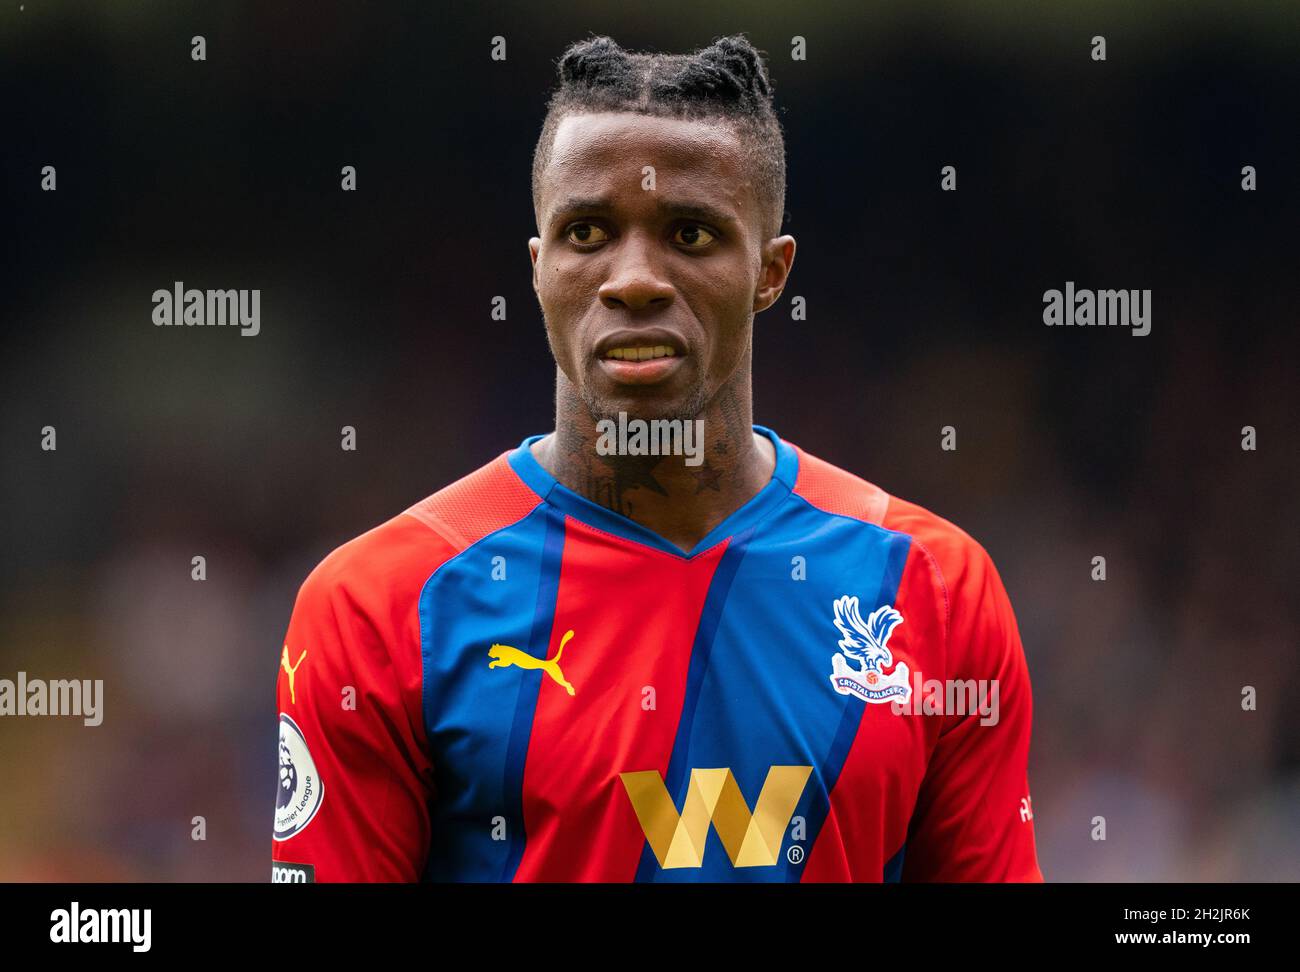 File photo dated 22-08-2021 of Crystal Palace's Wilfried Zaha during the Premier League match at Selhurst Park, London. Wilfried Zaha will return for Crystal Palace when they host Newcastle in the Premier League on Saturday. Issue date: Friday October 22, 2021. Stock Photo